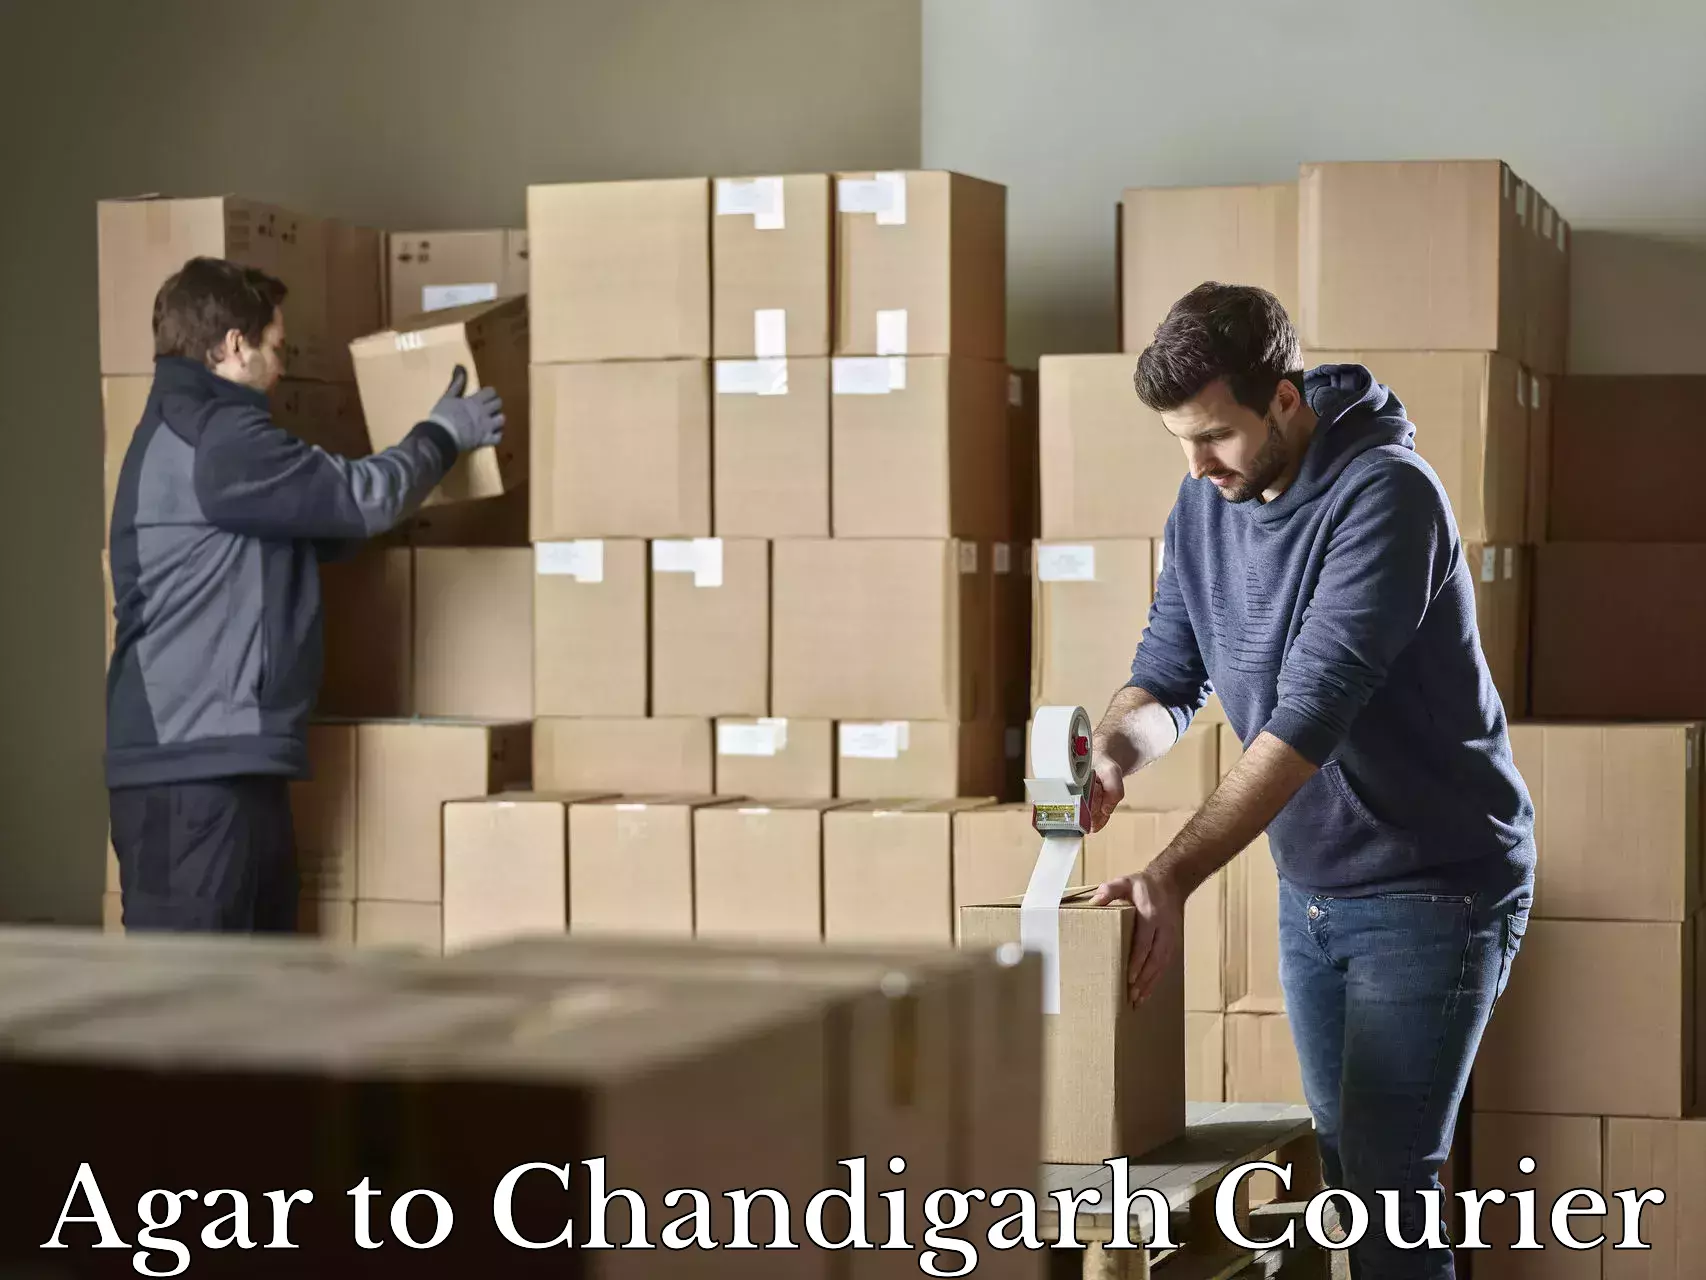 Luggage shipment specialists Agar to Chandigarh